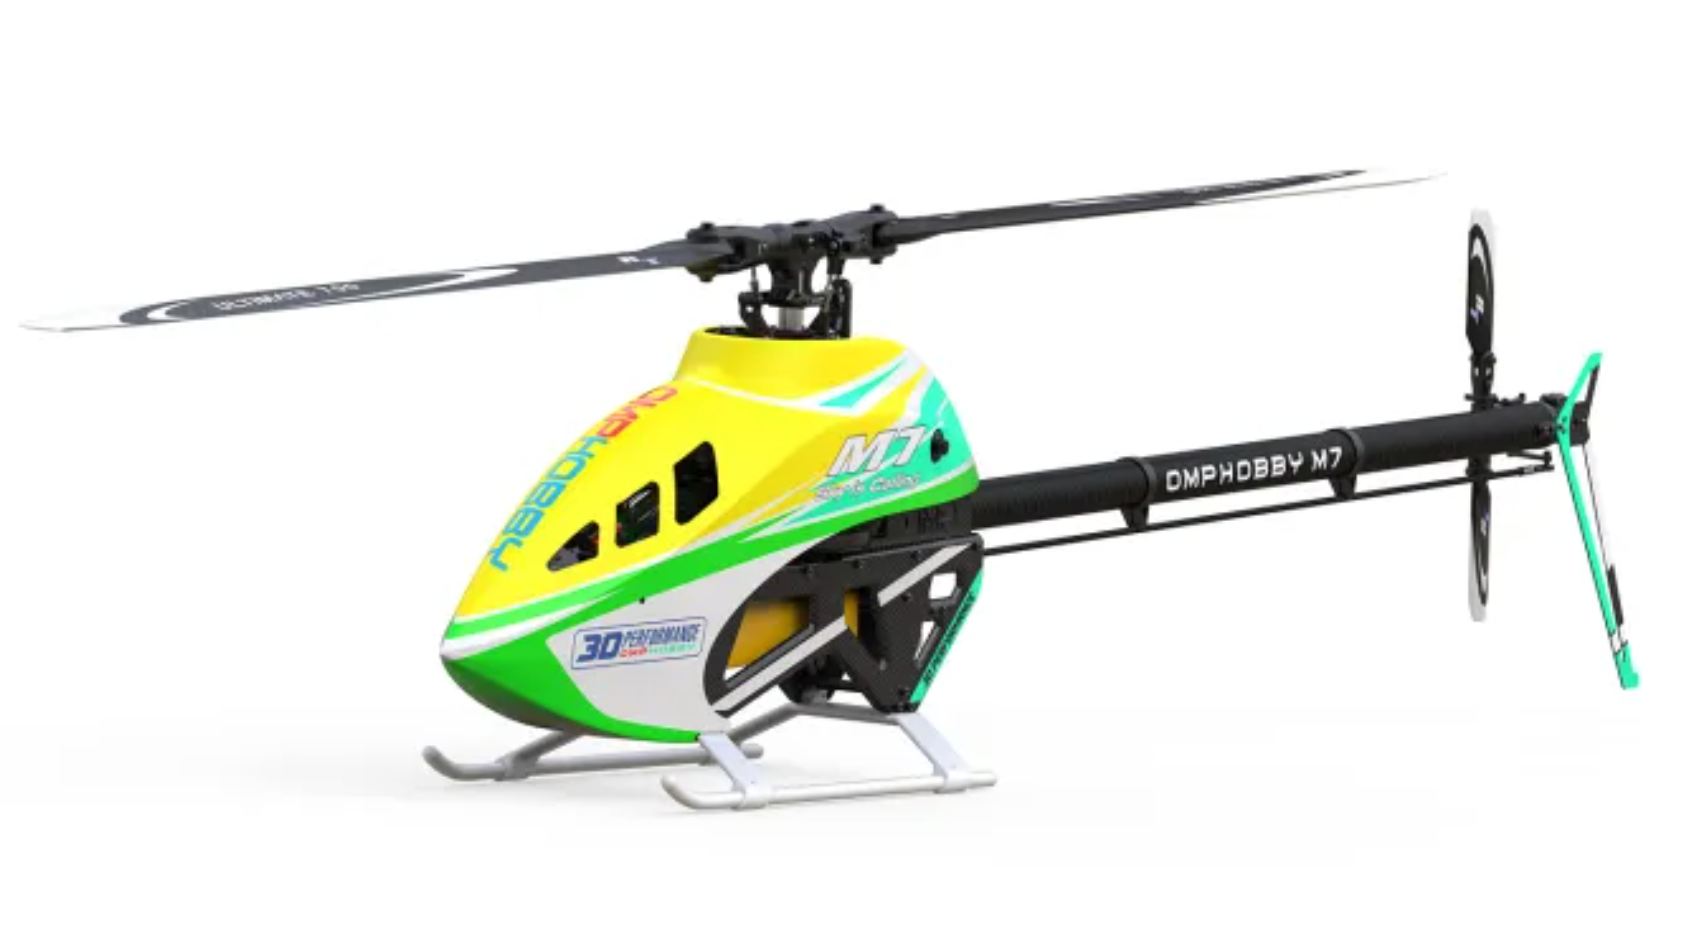 OMP Hobby M7 RC Helicopter Kit  (Lime Yellow)